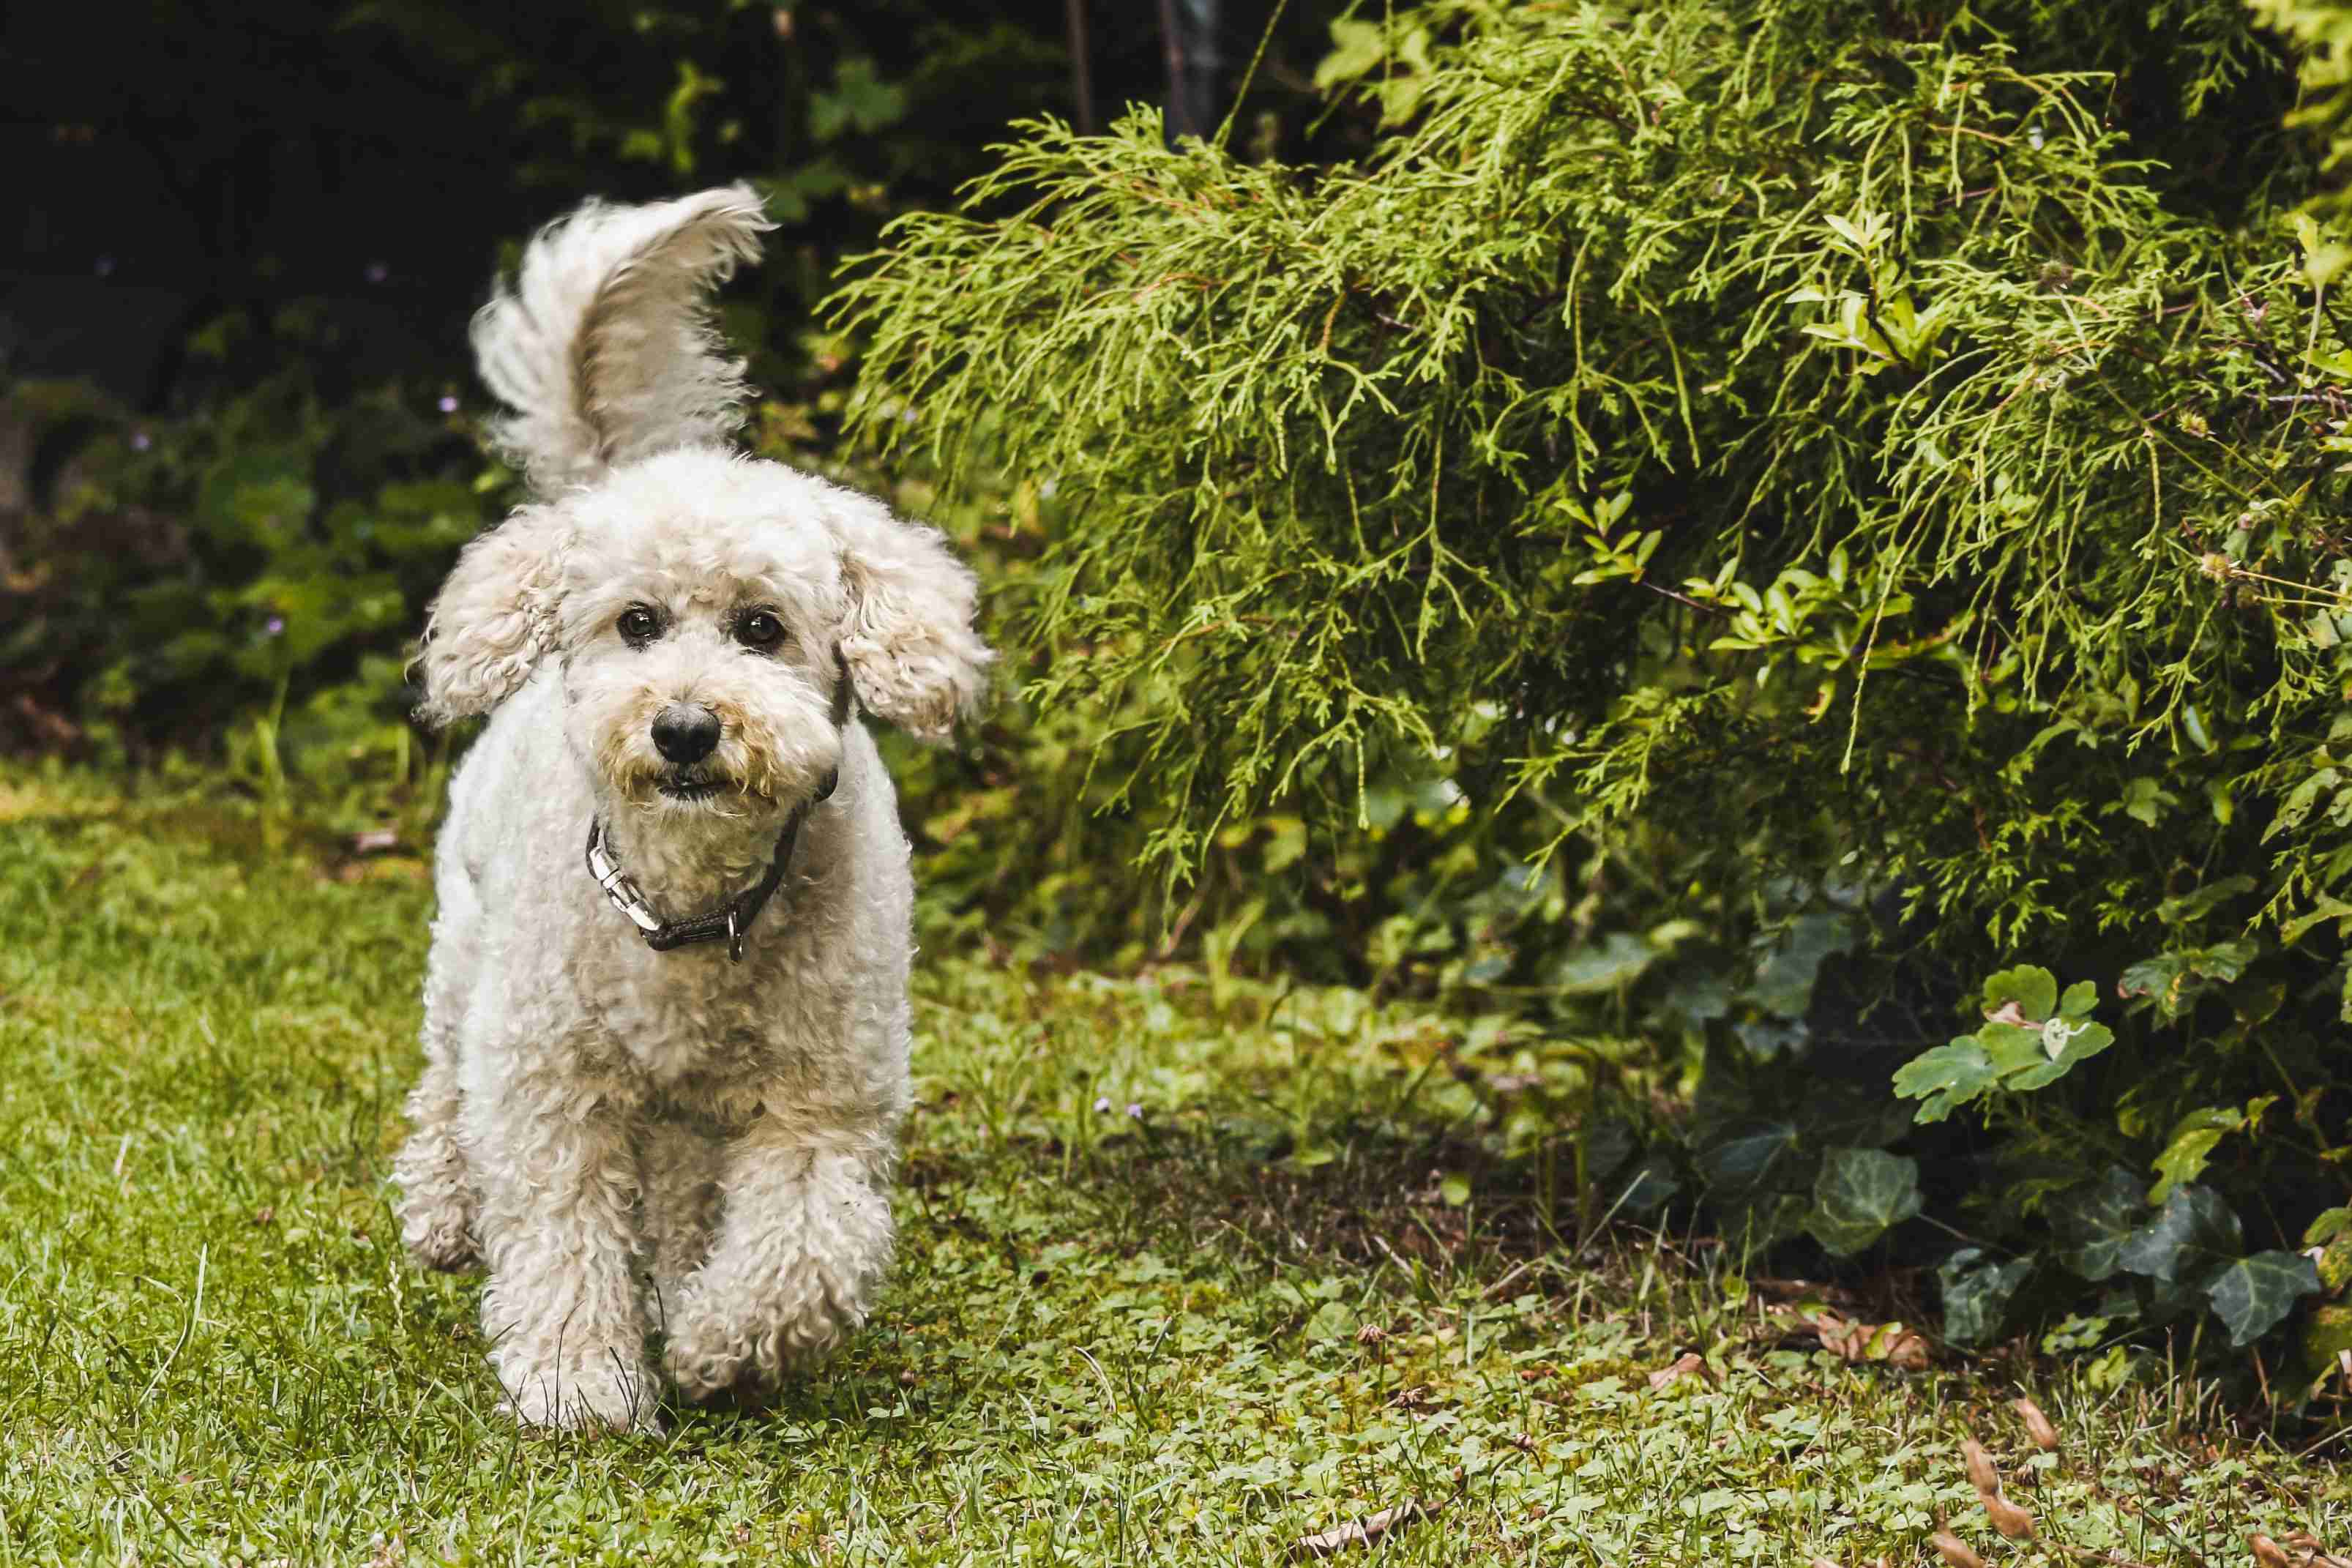 Are Poodles prone to obesity? What steps can be taken to maintain a healthy weight?